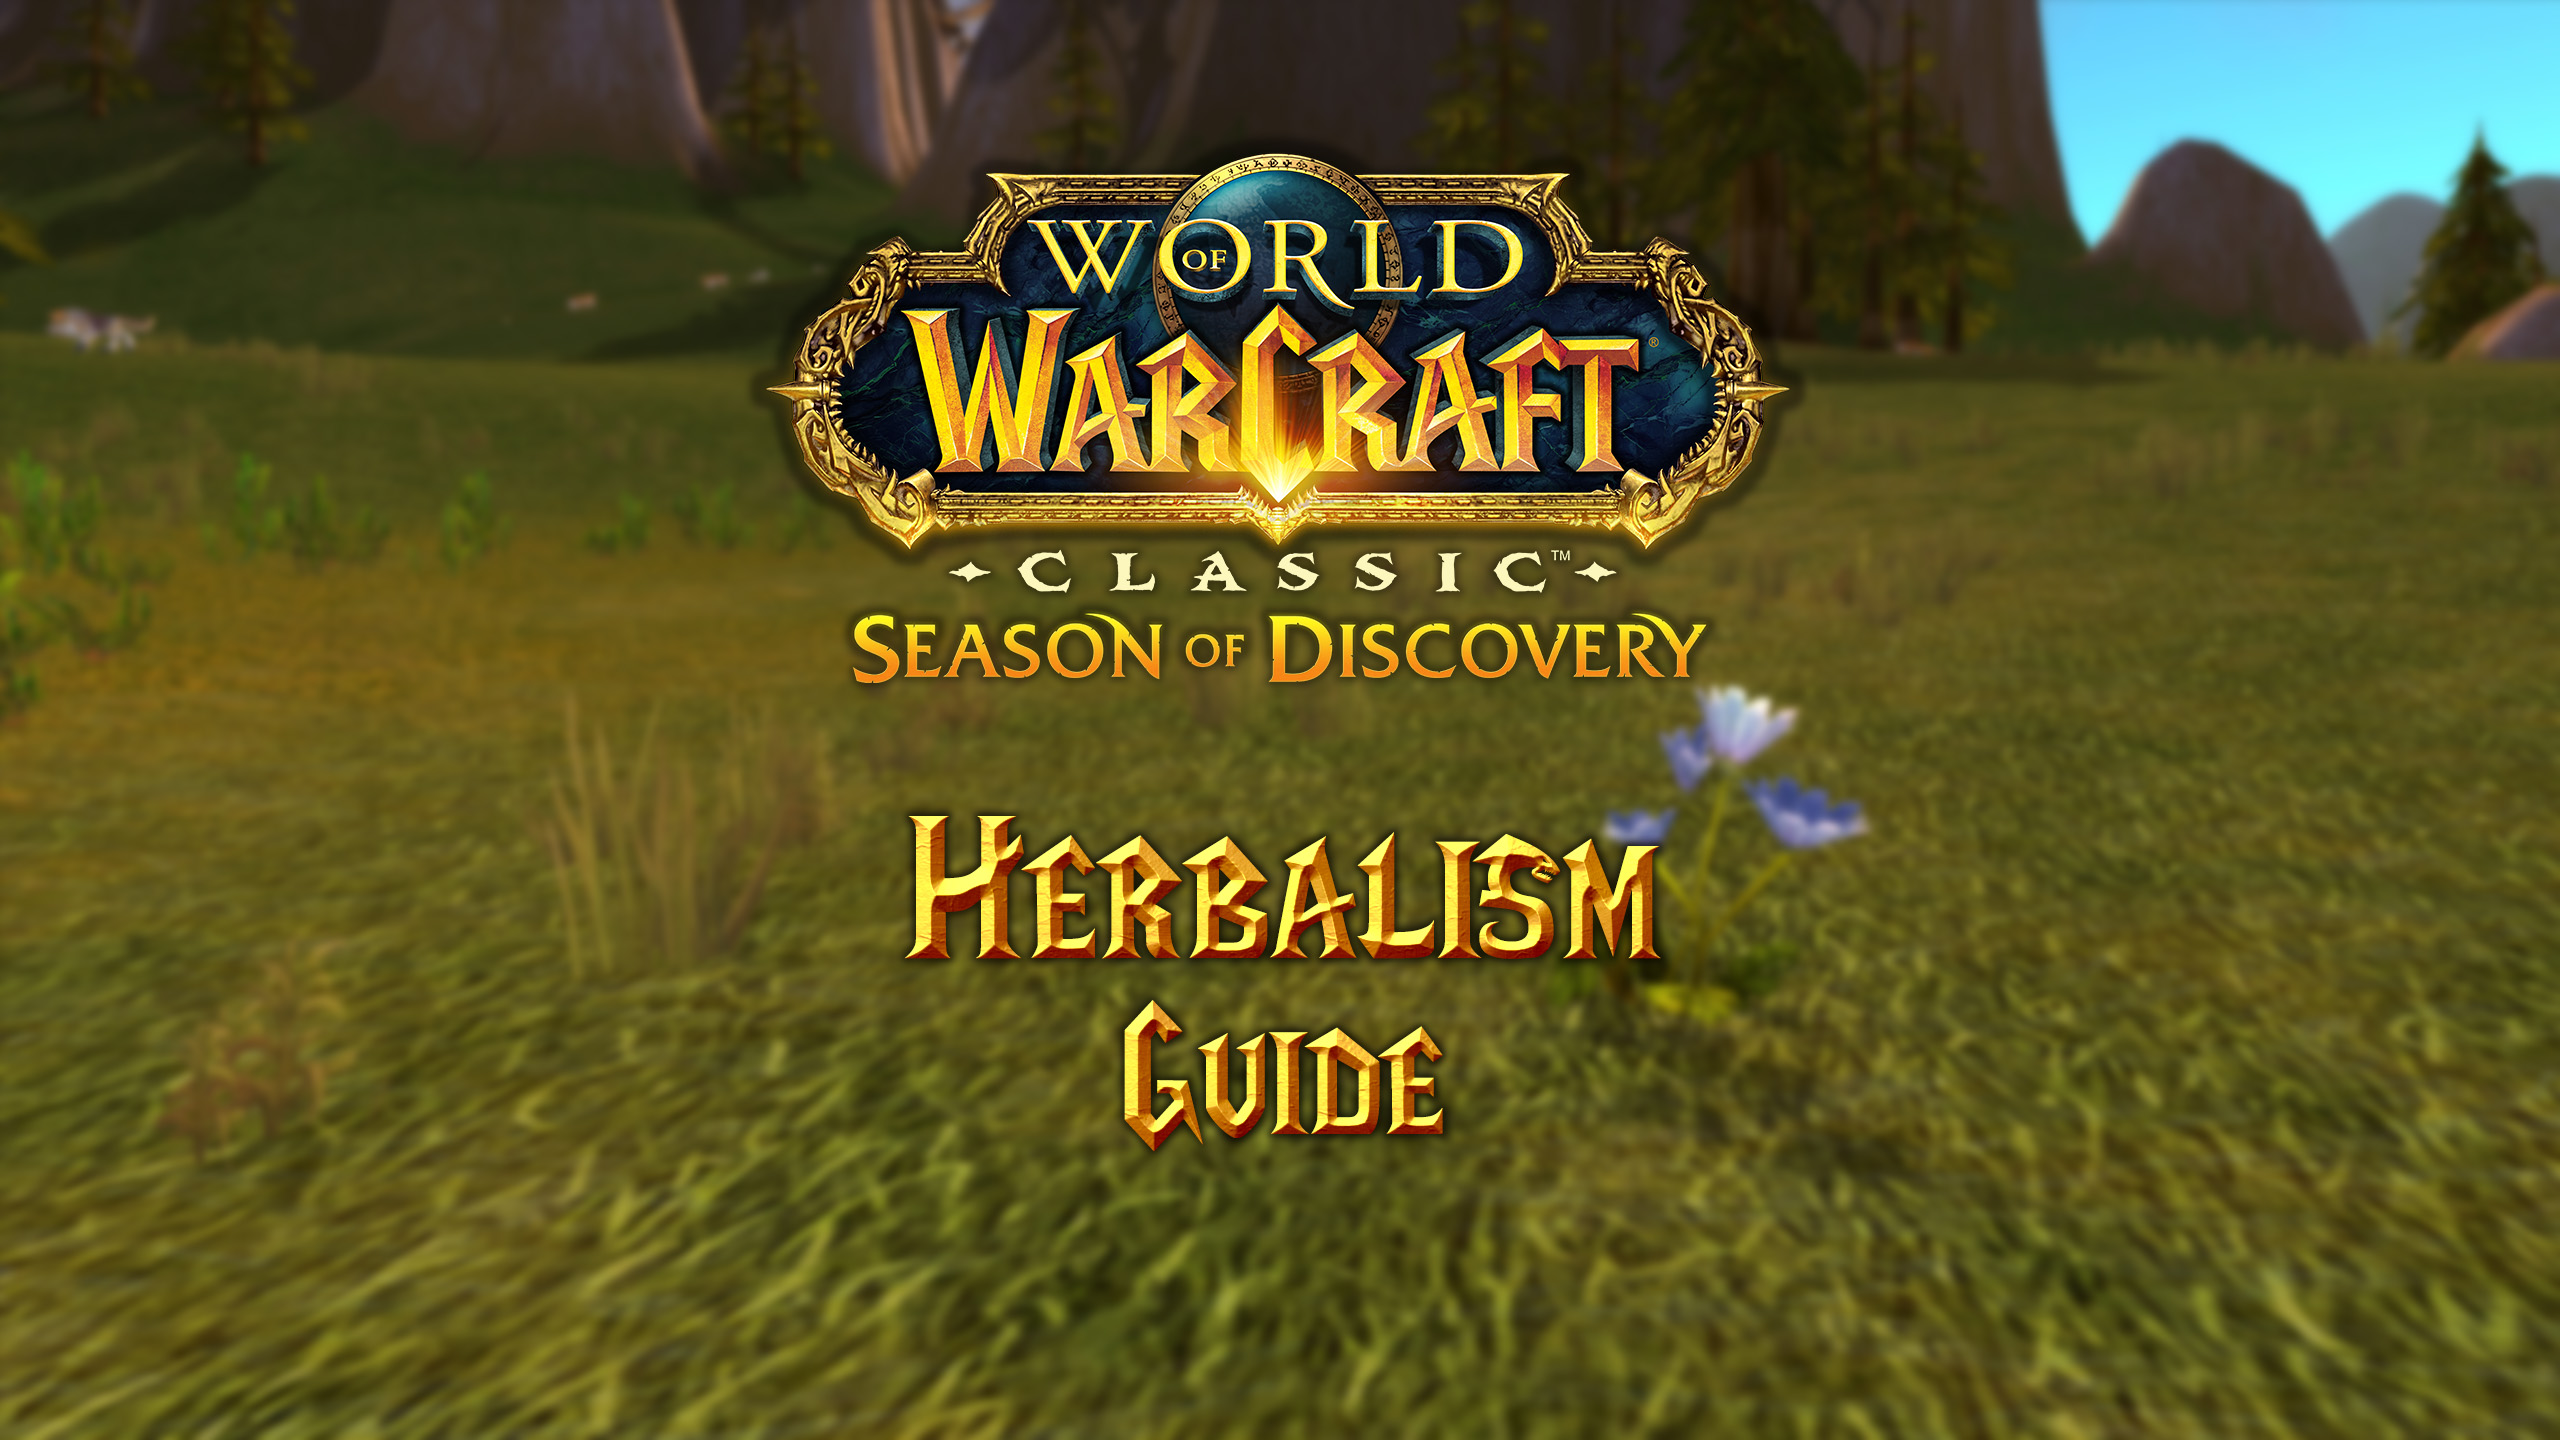 Herbalism Guide for Season of Discovery (SoD) Phase 2 - Warcraft